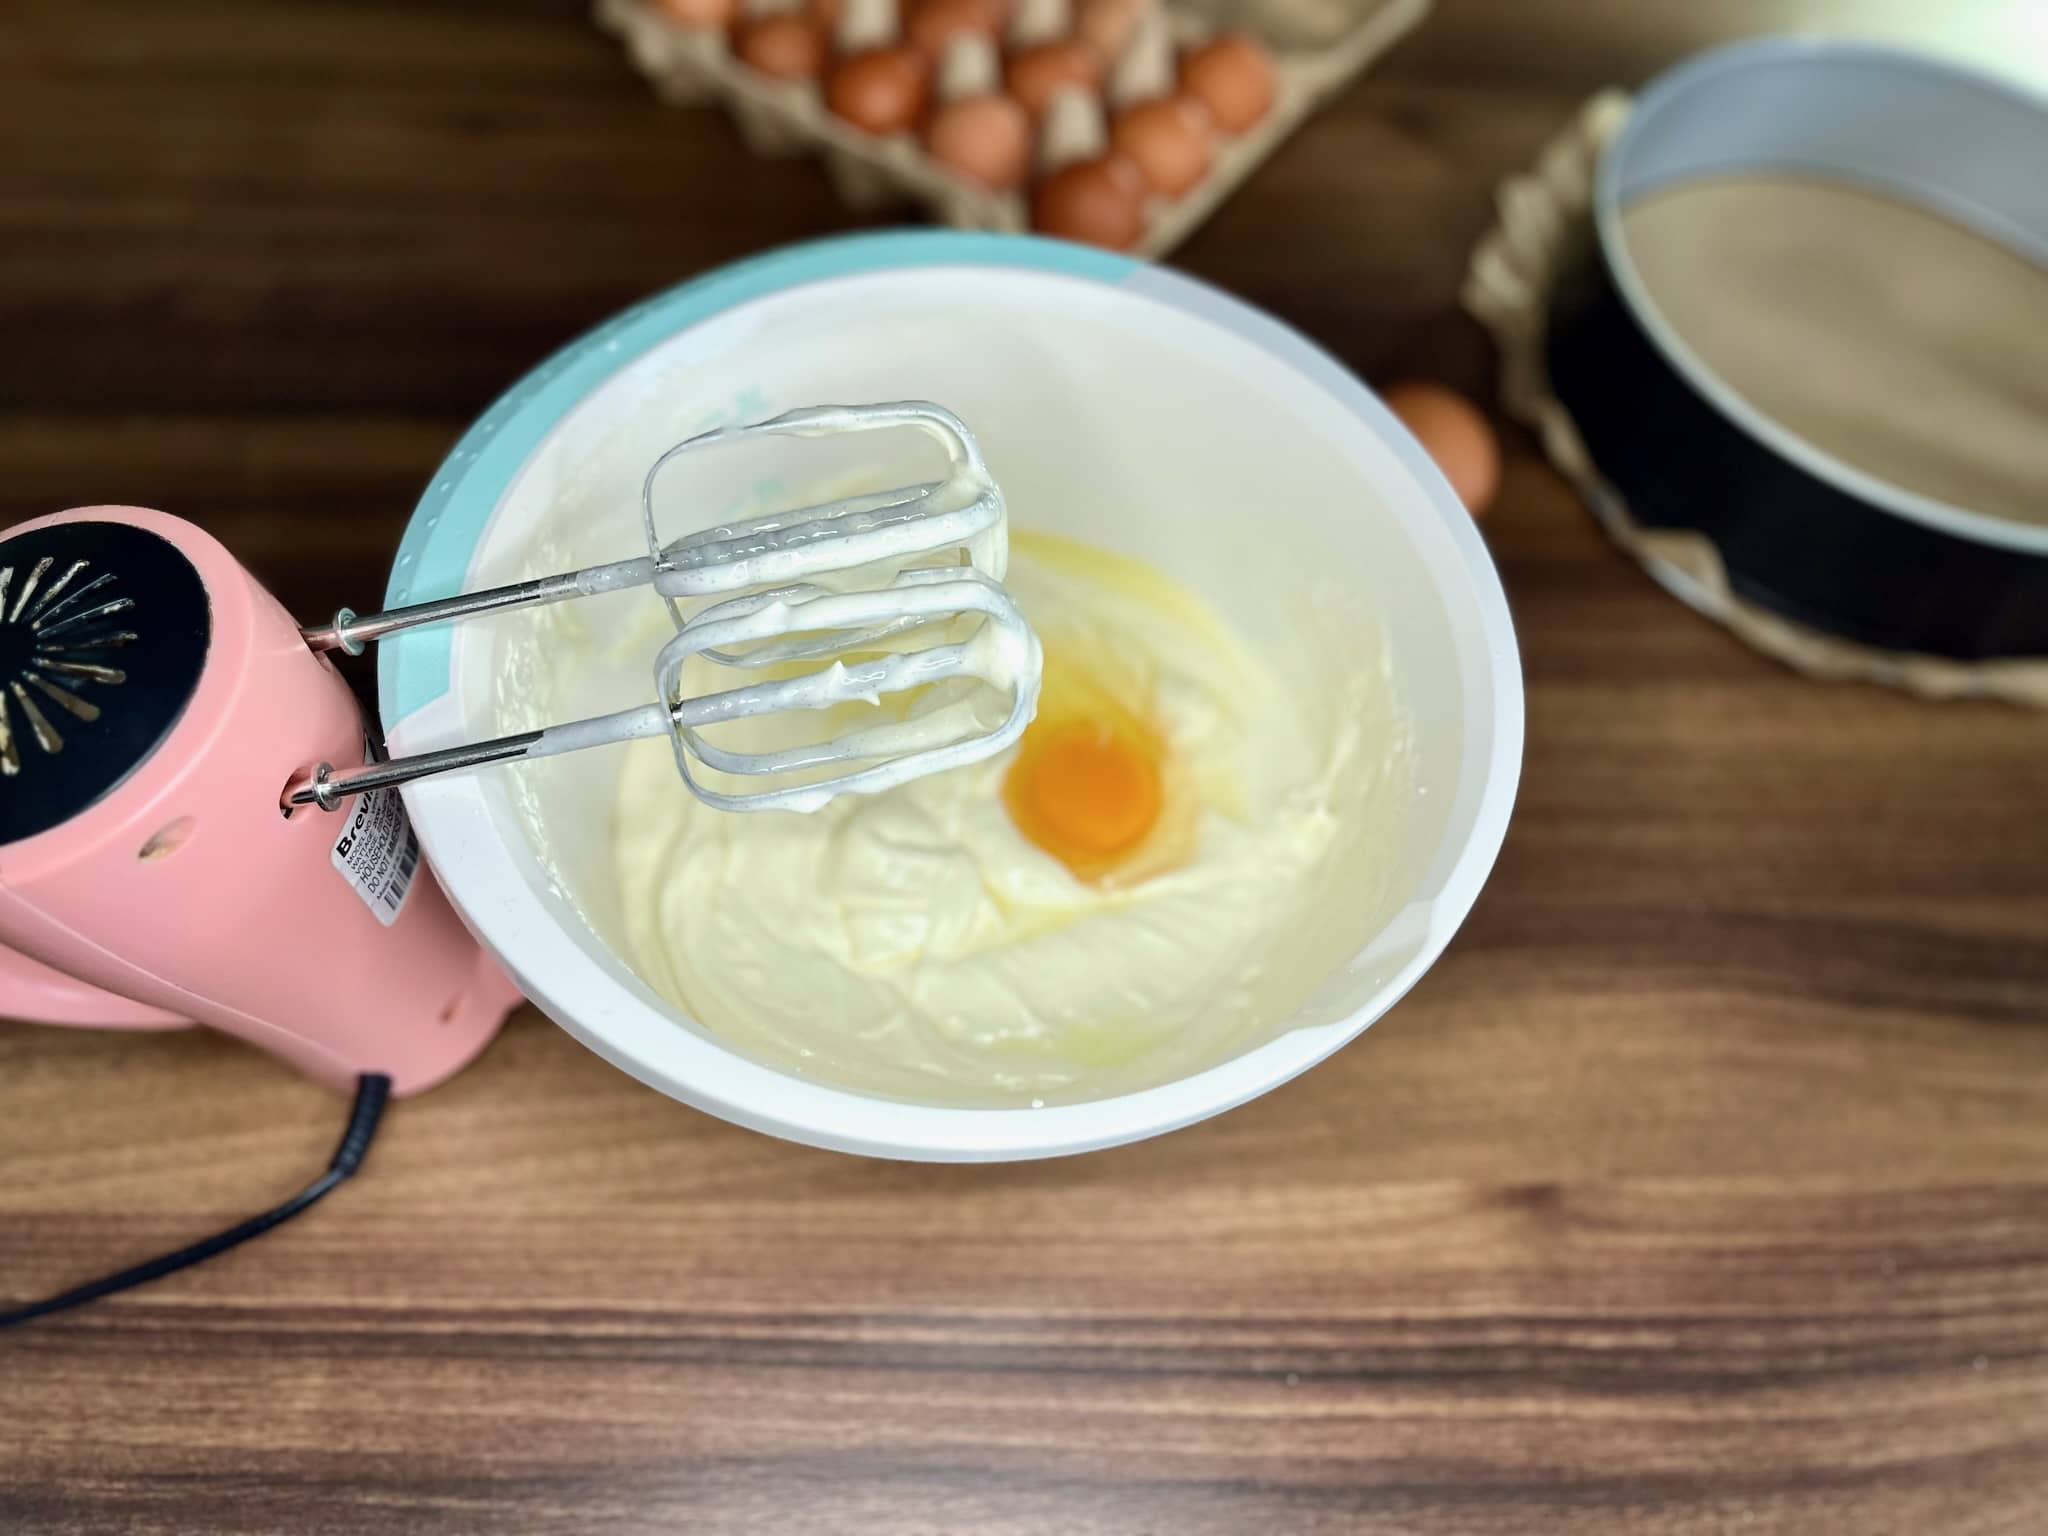 Soft cream cheese beaten with an egg in a mixing bowl